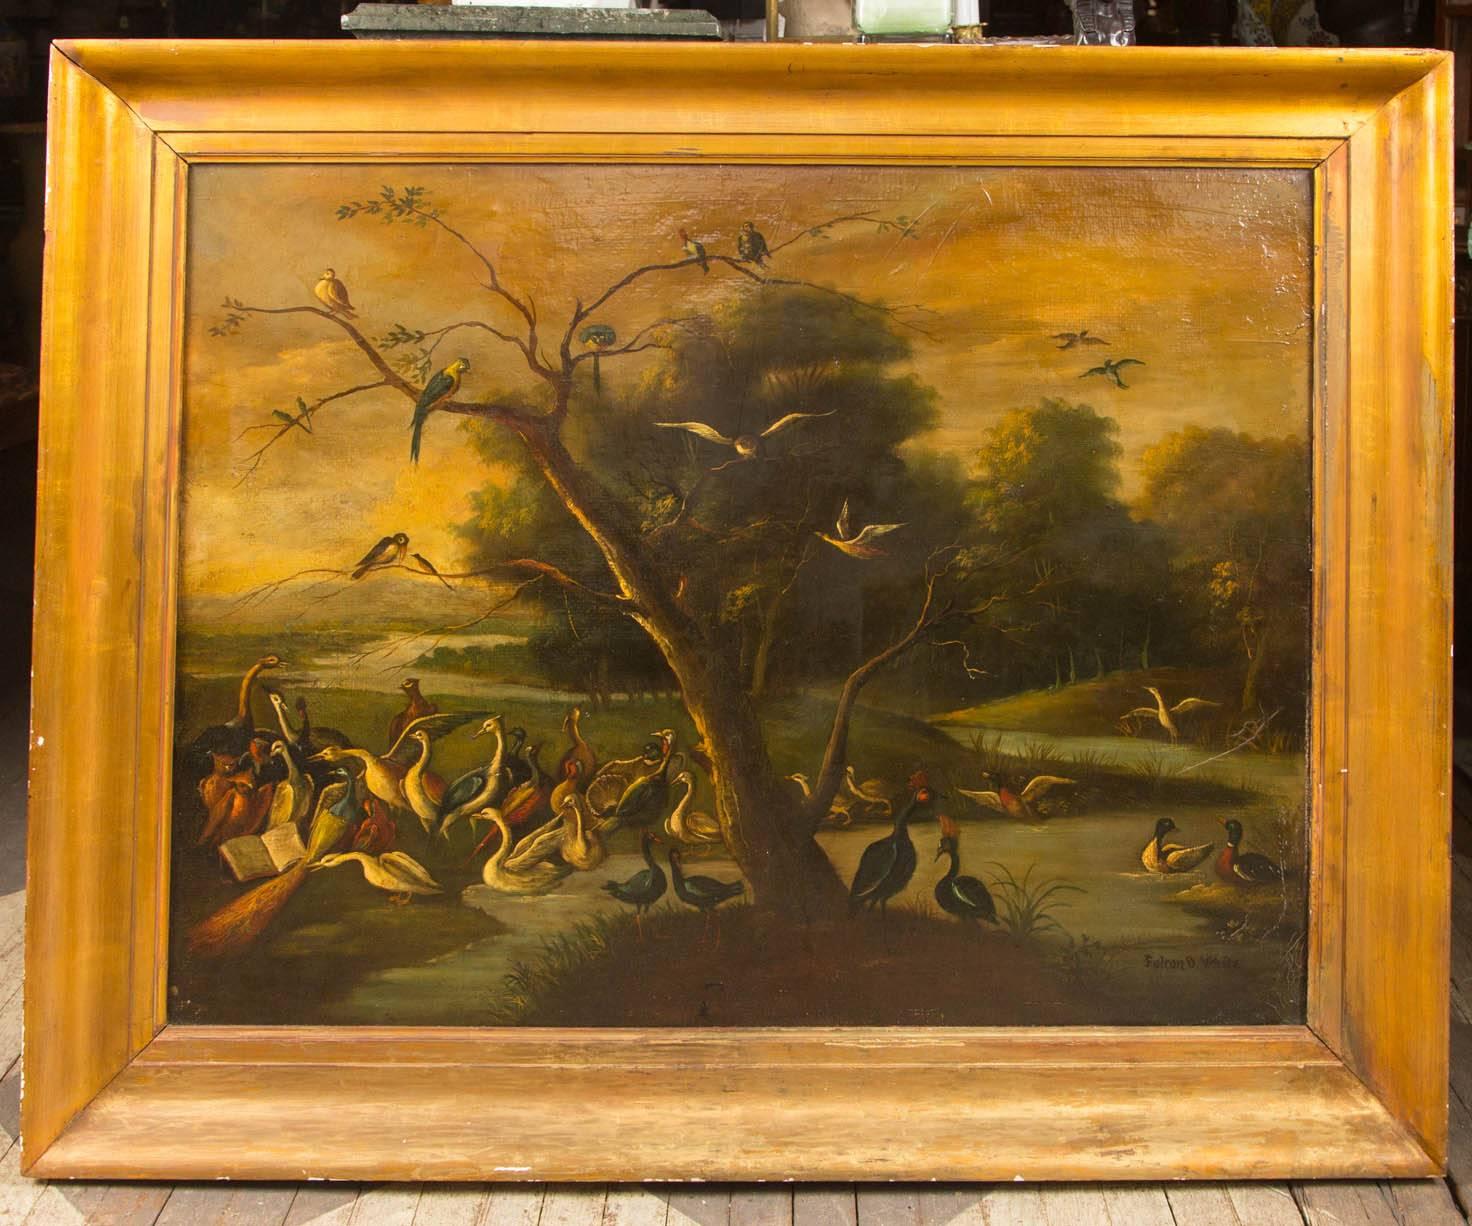 Geese, swans and ducks flock by a woodland stream. Giltwood frame. Signed lower right Fulton D. White.
In as found condition.